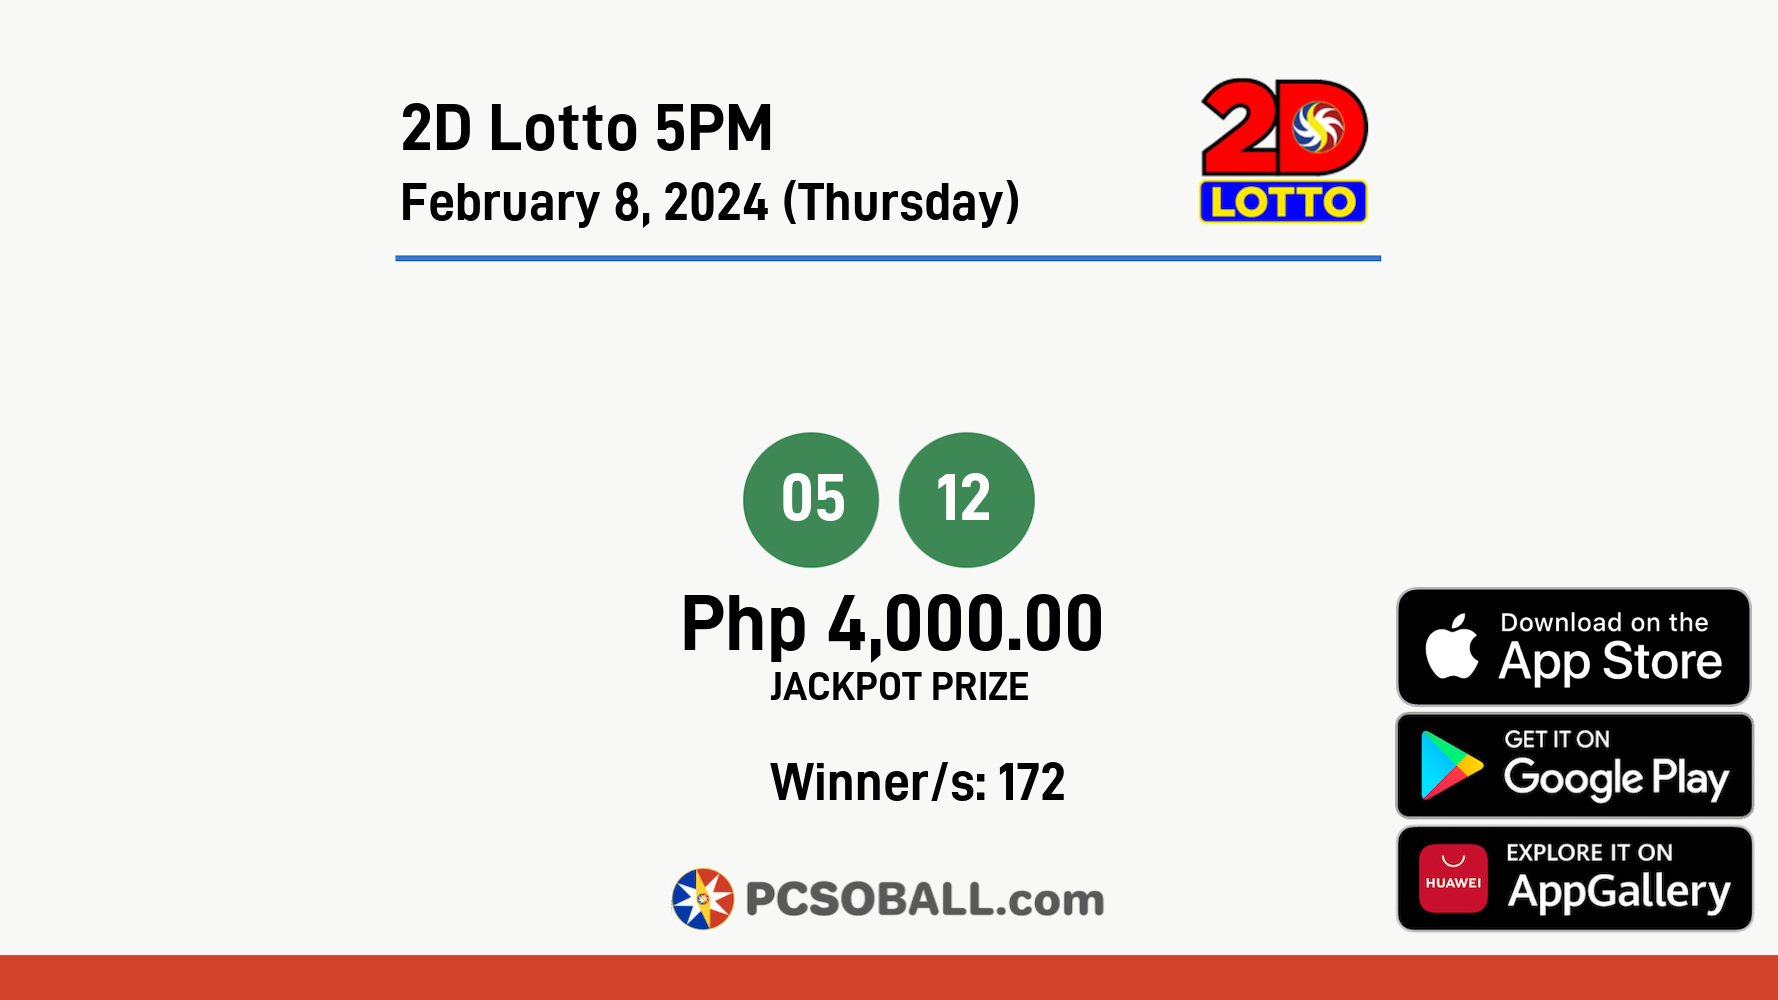 2D Lotto 5PM February 8, 2024 (Thursday) Result